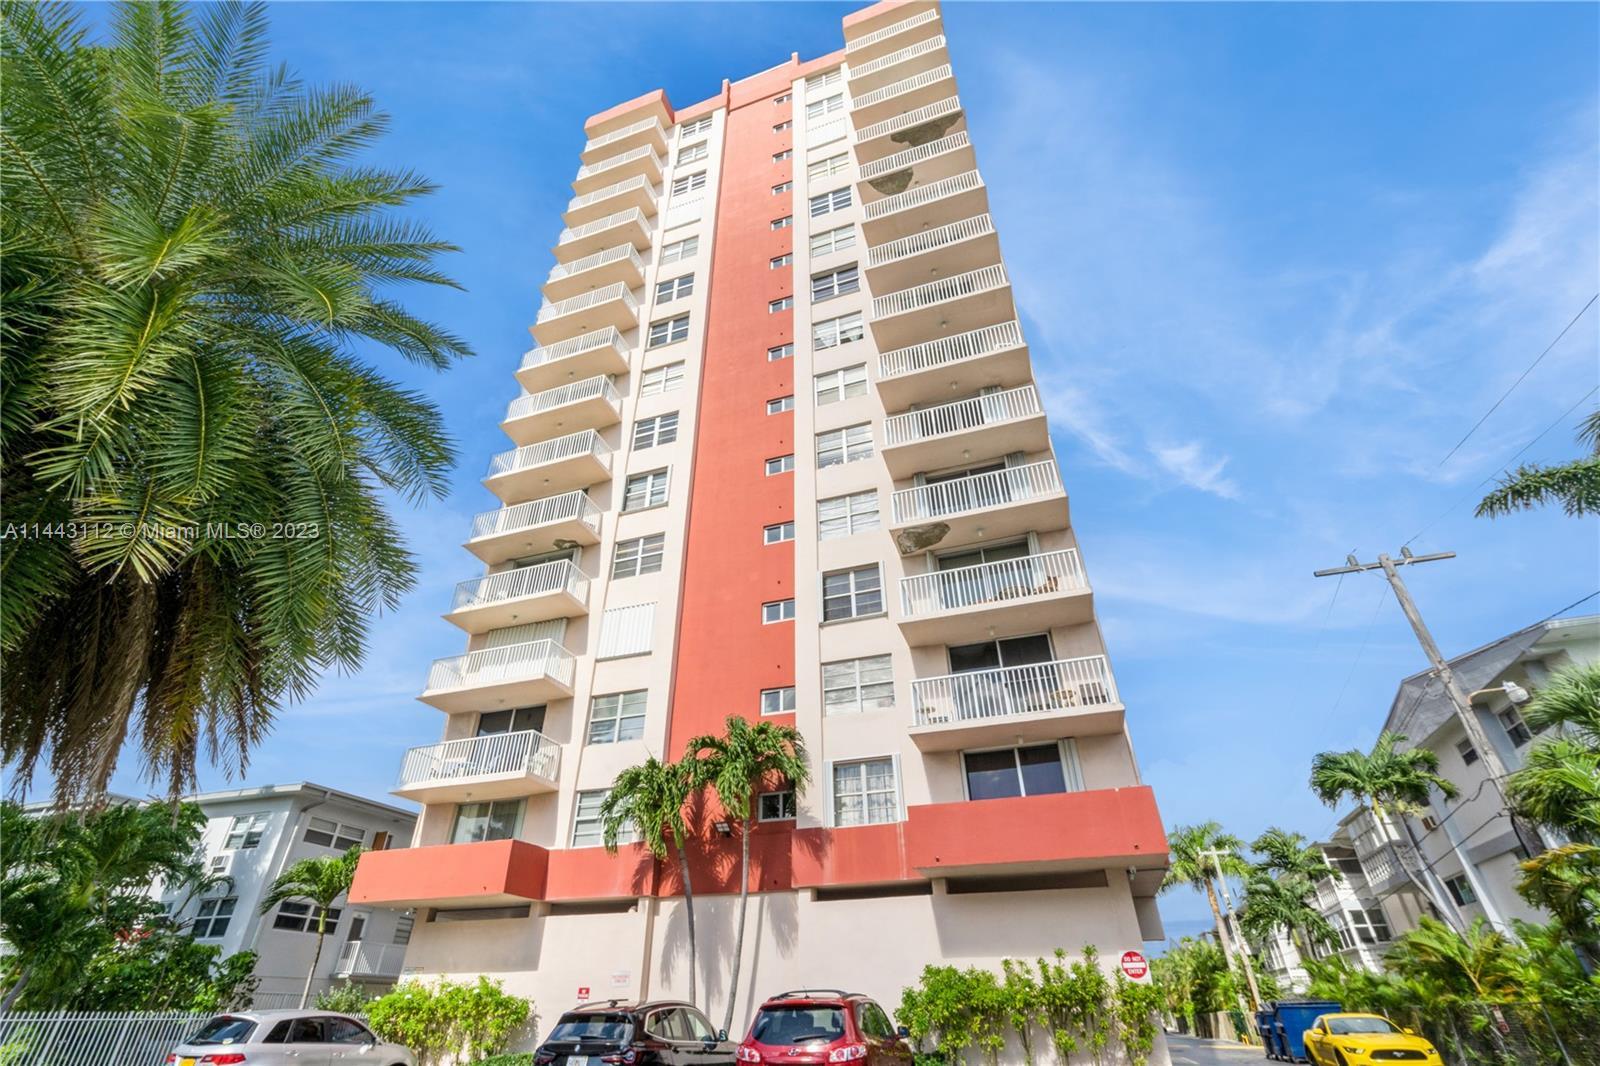 Embrace tranquility in this inviting 1 Bedroom/1.5 Bath condo, nestled in desirable Hallandale Beach